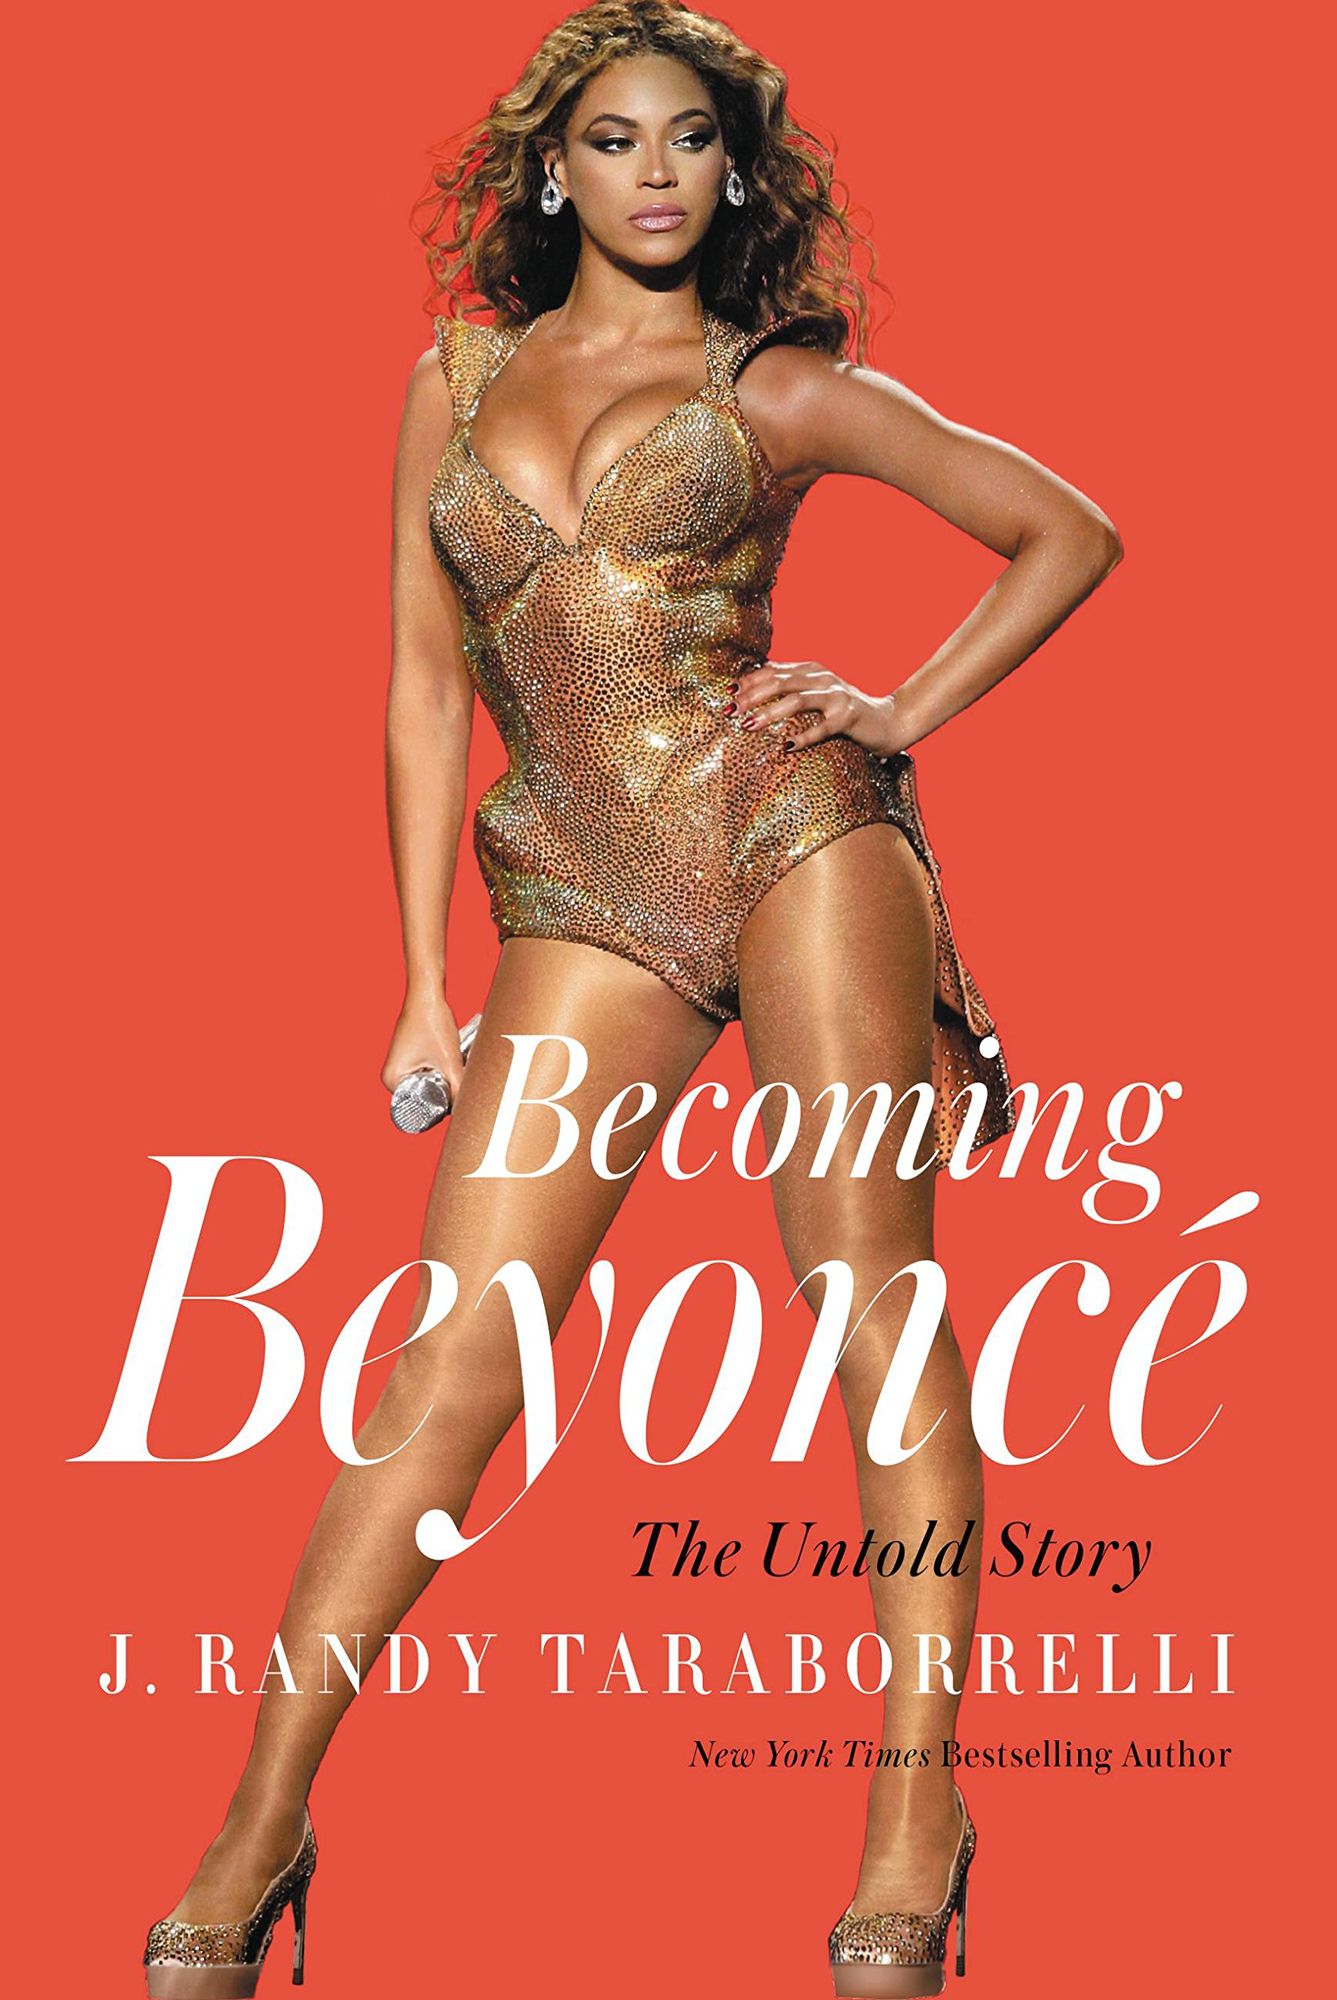 Book Of Beyonce's Life - UNAUTHORIZED BIOGRAPHY